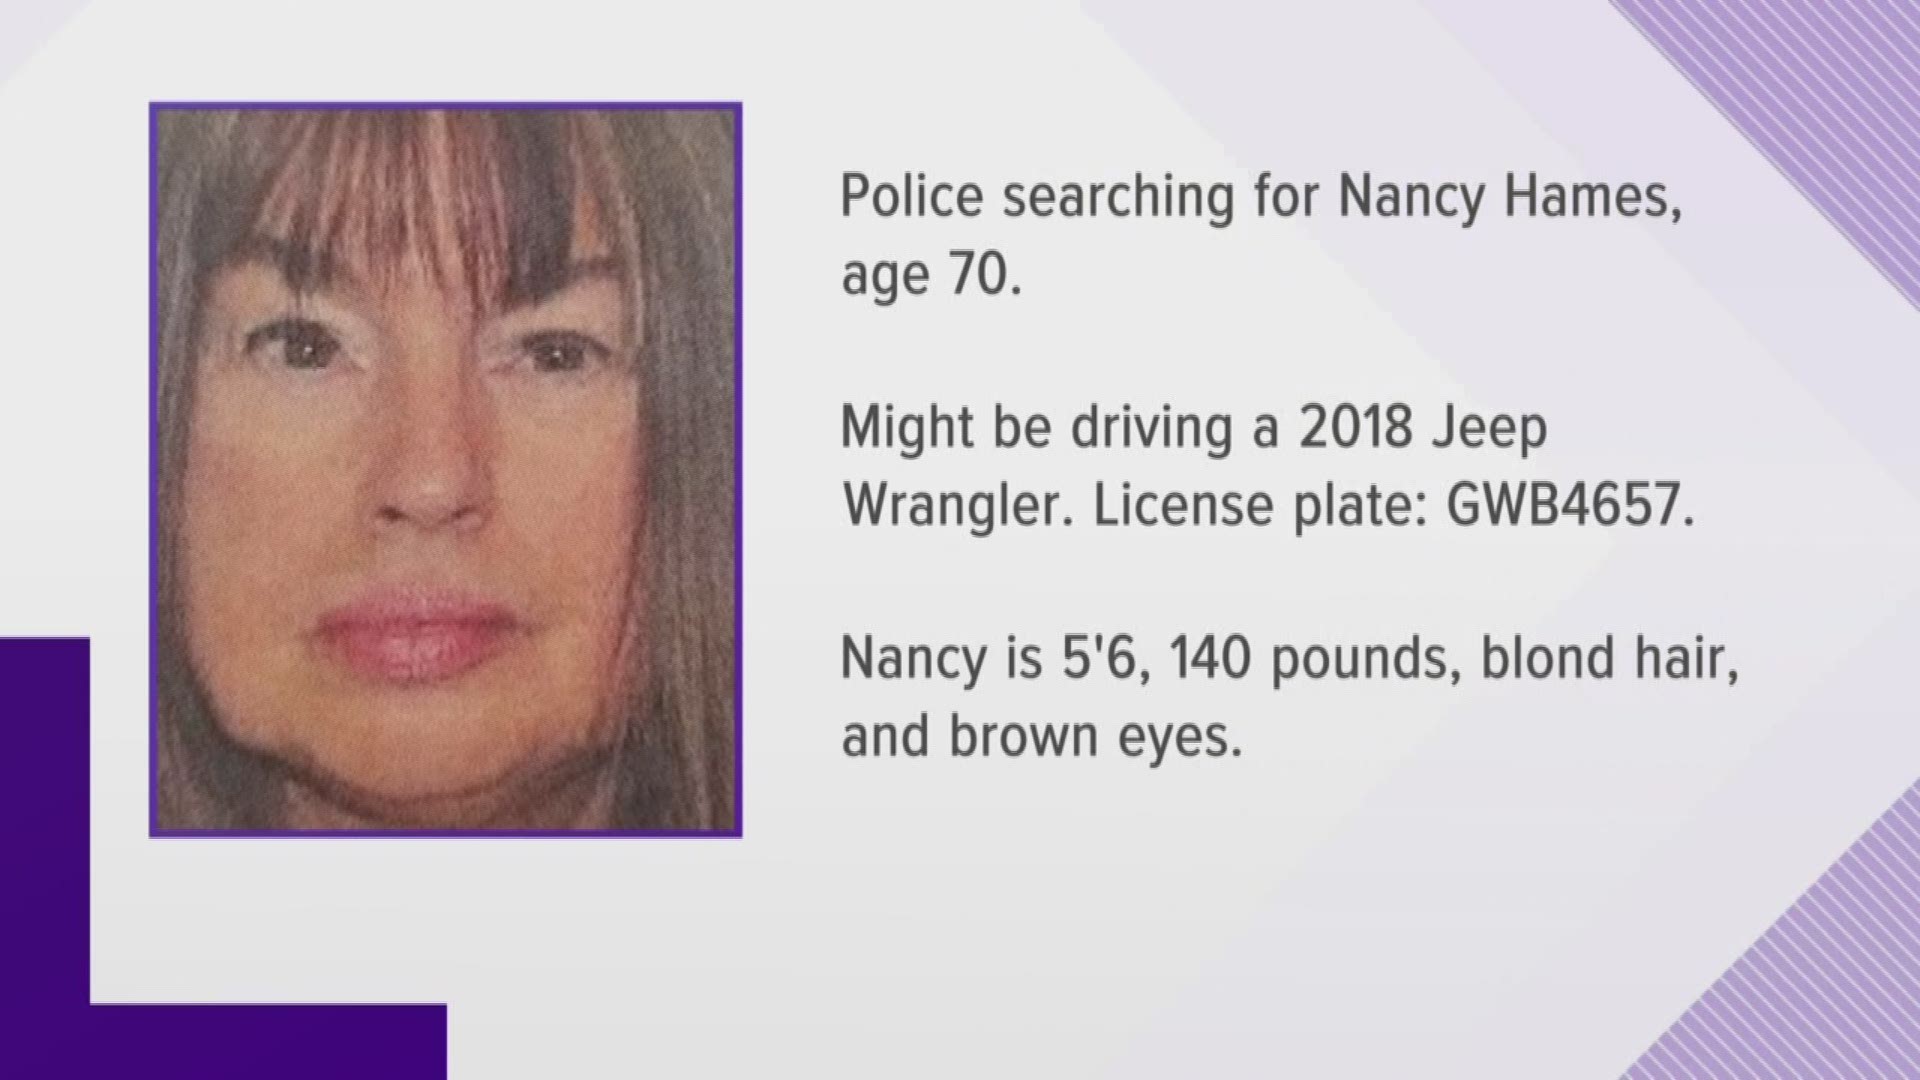 Toledo Police are searching for Nancy Hames of Point Place who may be driving a lime green 2018 Jeep Wrangler